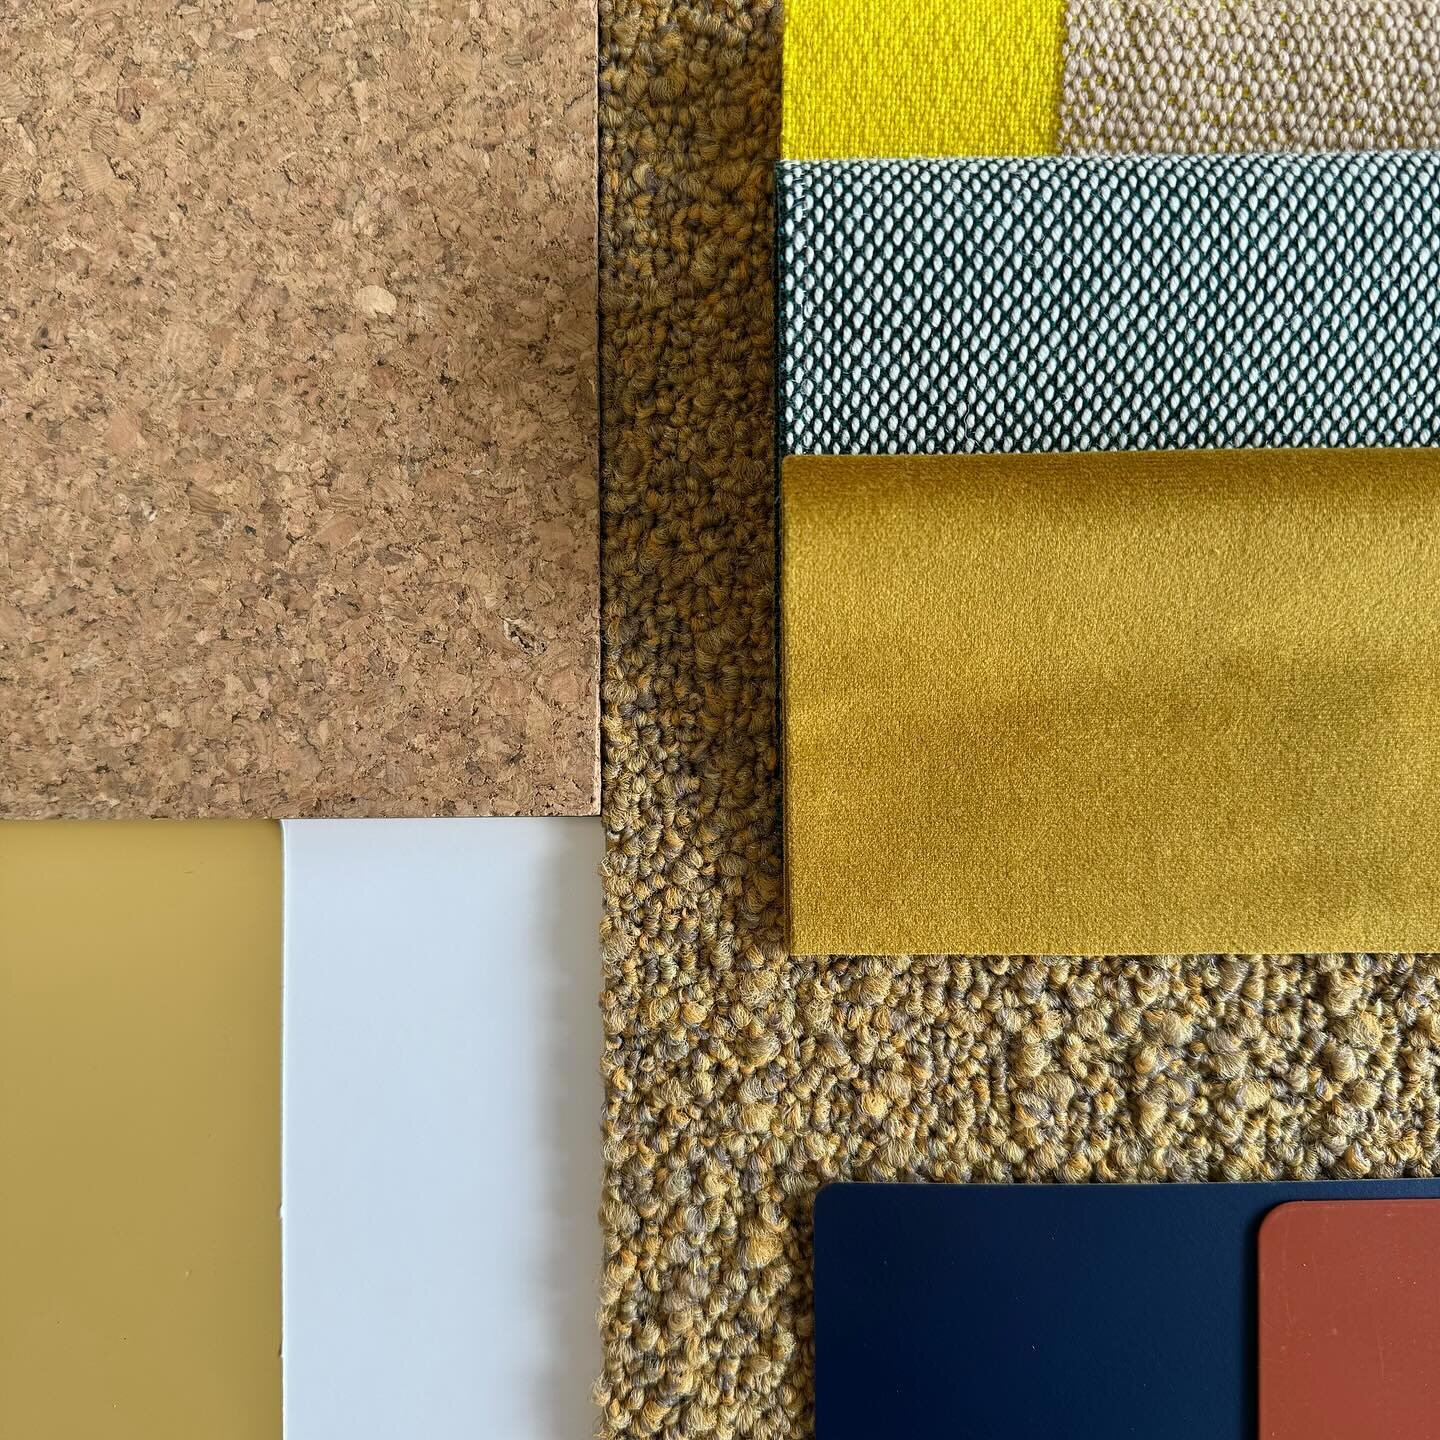 - SITE UPDATE - work has started this week on a new office and design studio for our rad friends @radicalyes 
Lovely warm layers in this palette 💛
.
#moleculestudio 
#moleculeradicalyesHQ
#interiordesign 
#designstudio 
#radicalyes